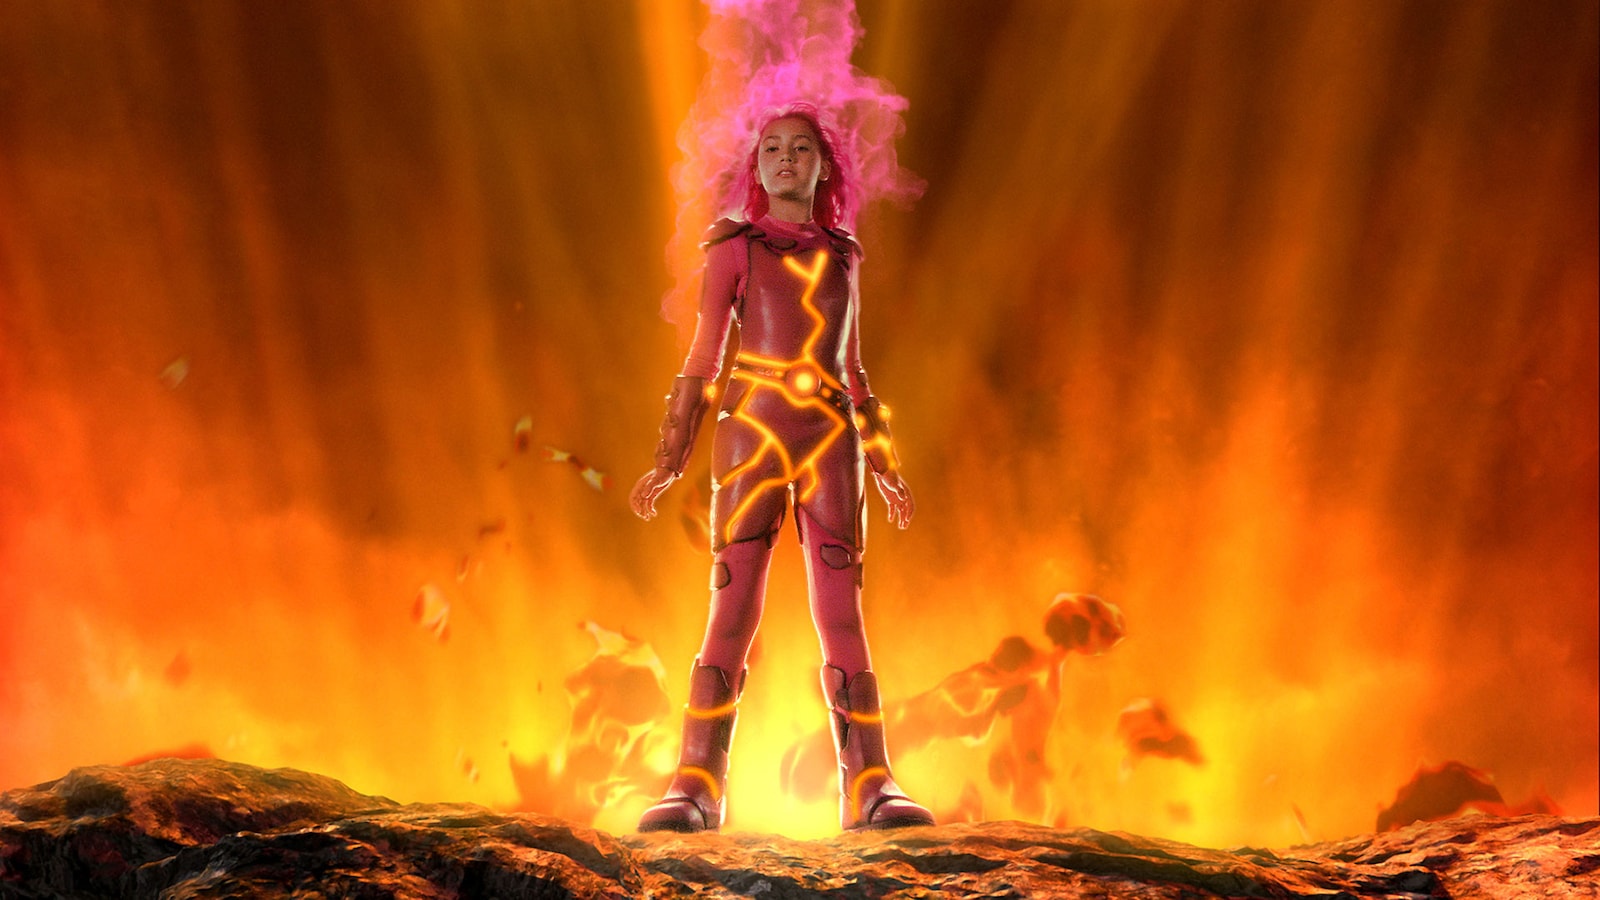 the-adventures-of-sharkboy-and-lavagirl-2005